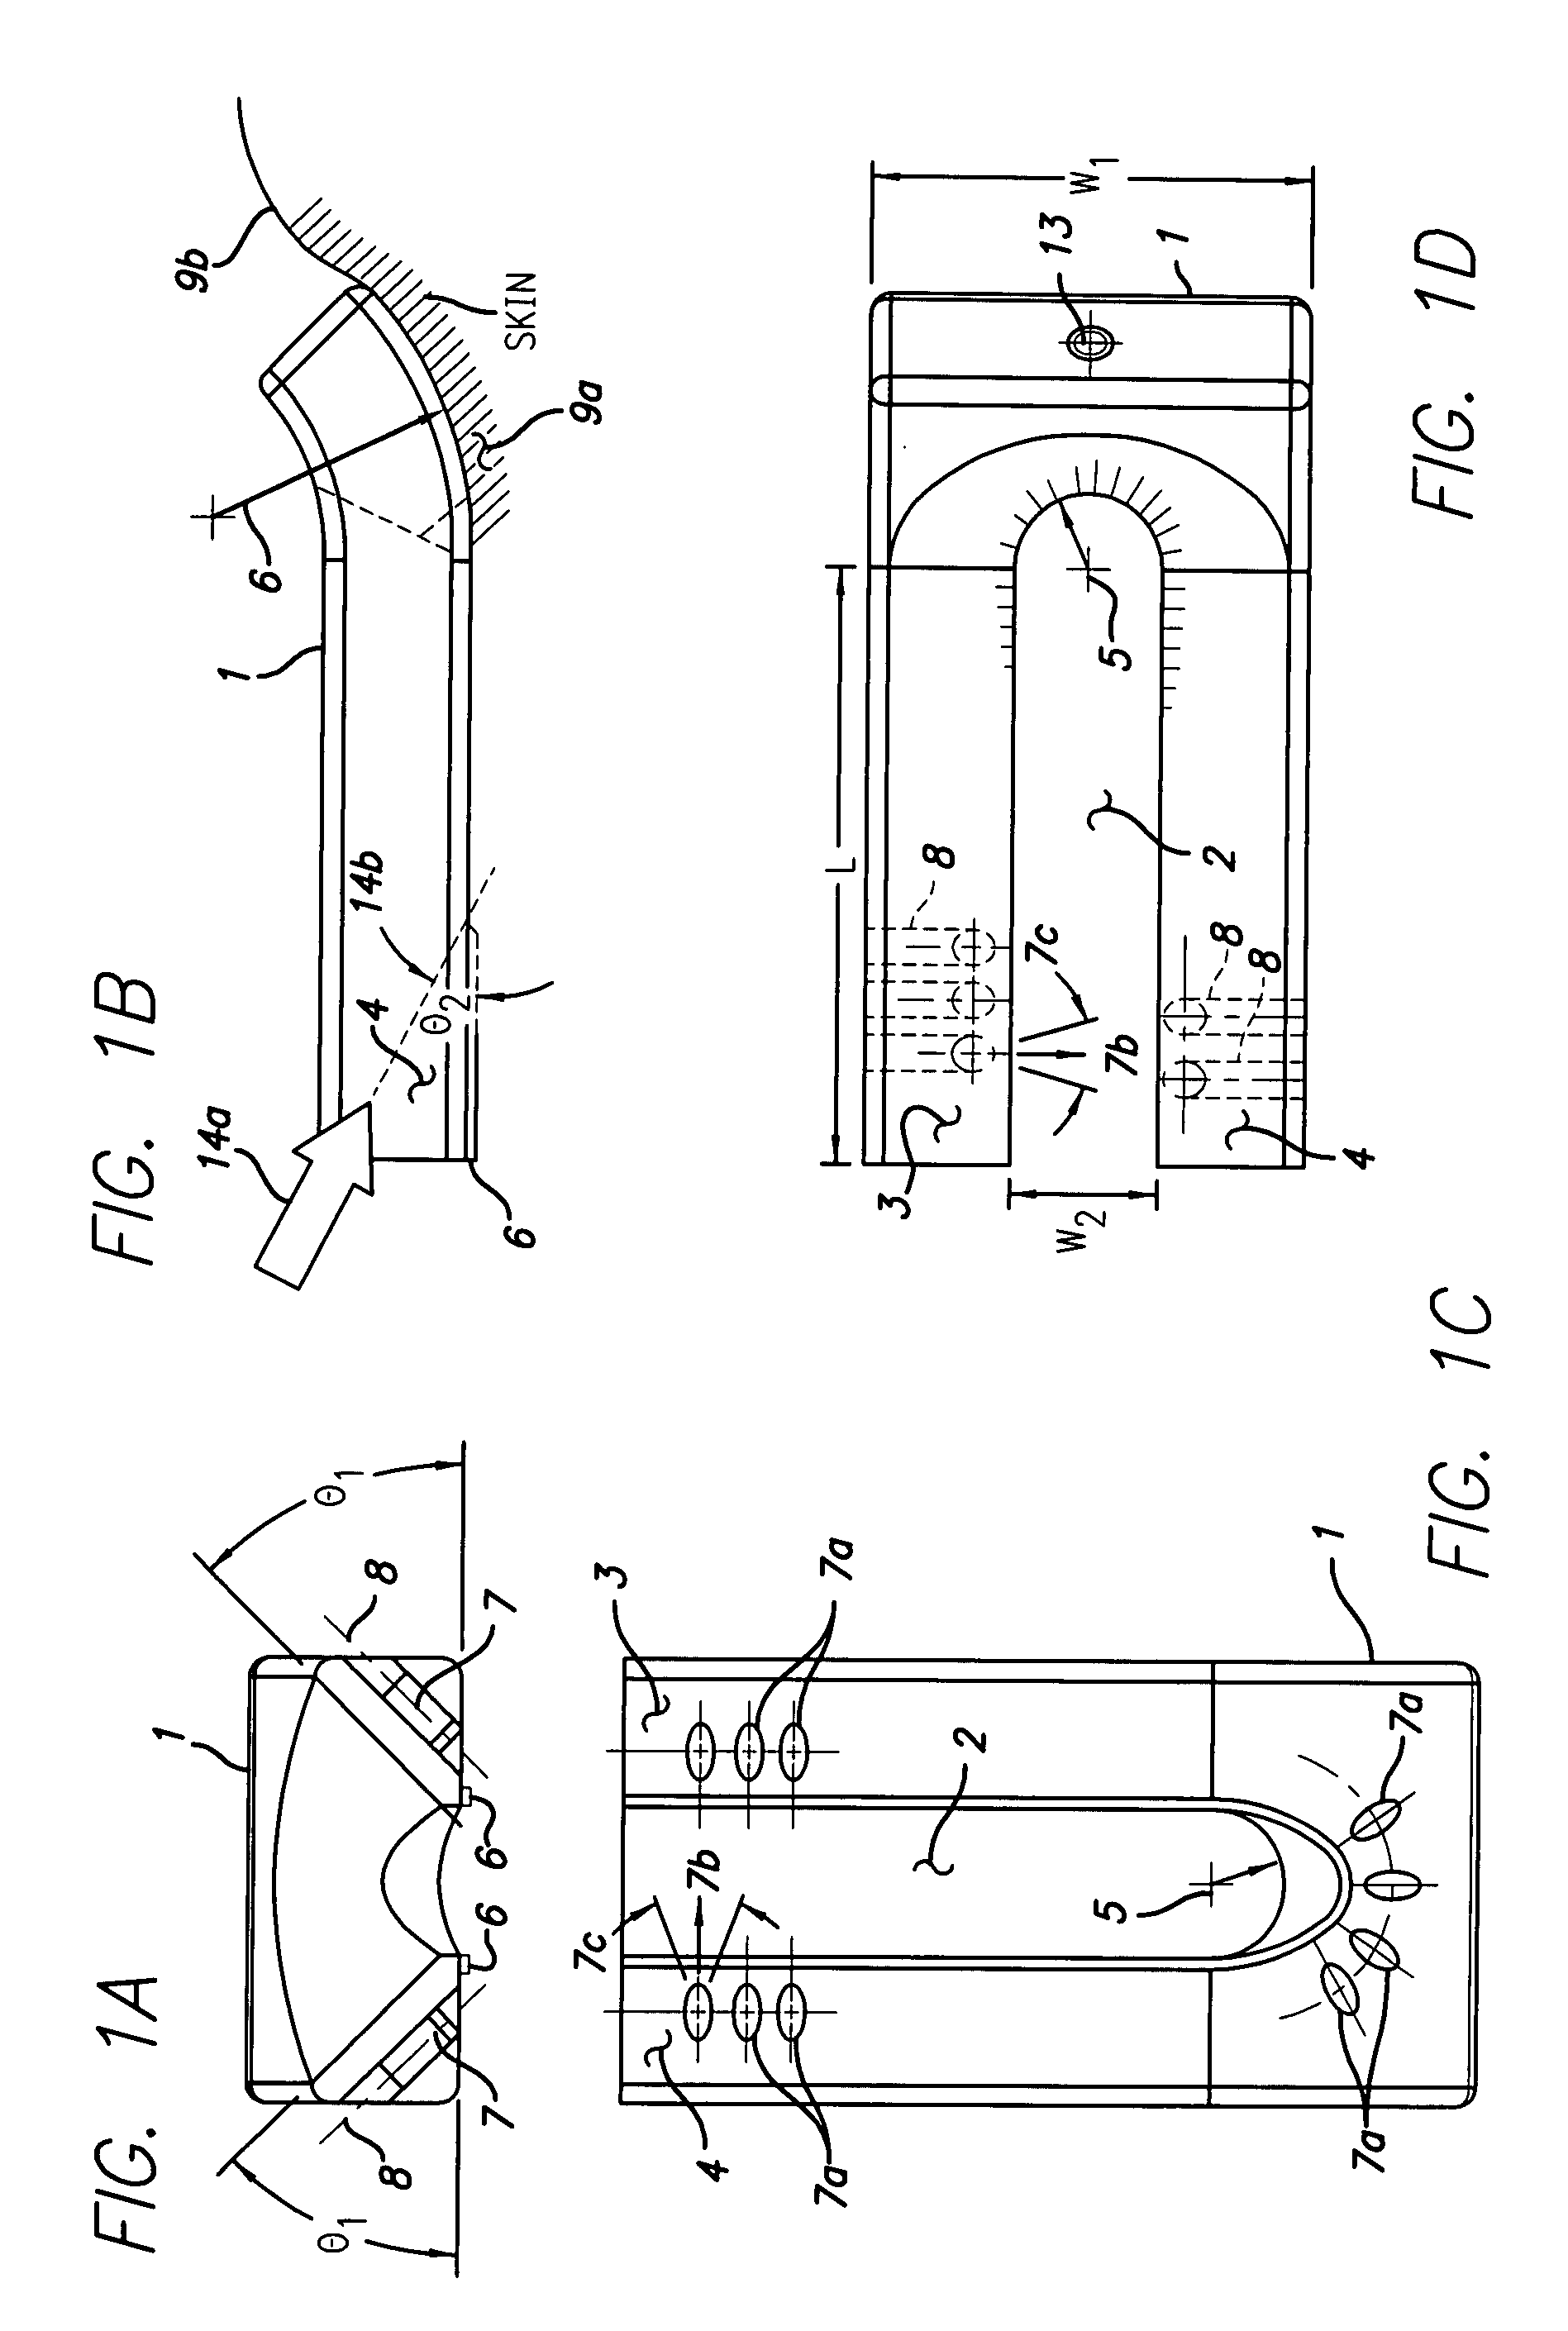 Medical-procedure assistance device and method with improved optical contrast, and new practitioner-safety, device-fixation, electrode and magnetic treatment and lumen-dilation capabilities